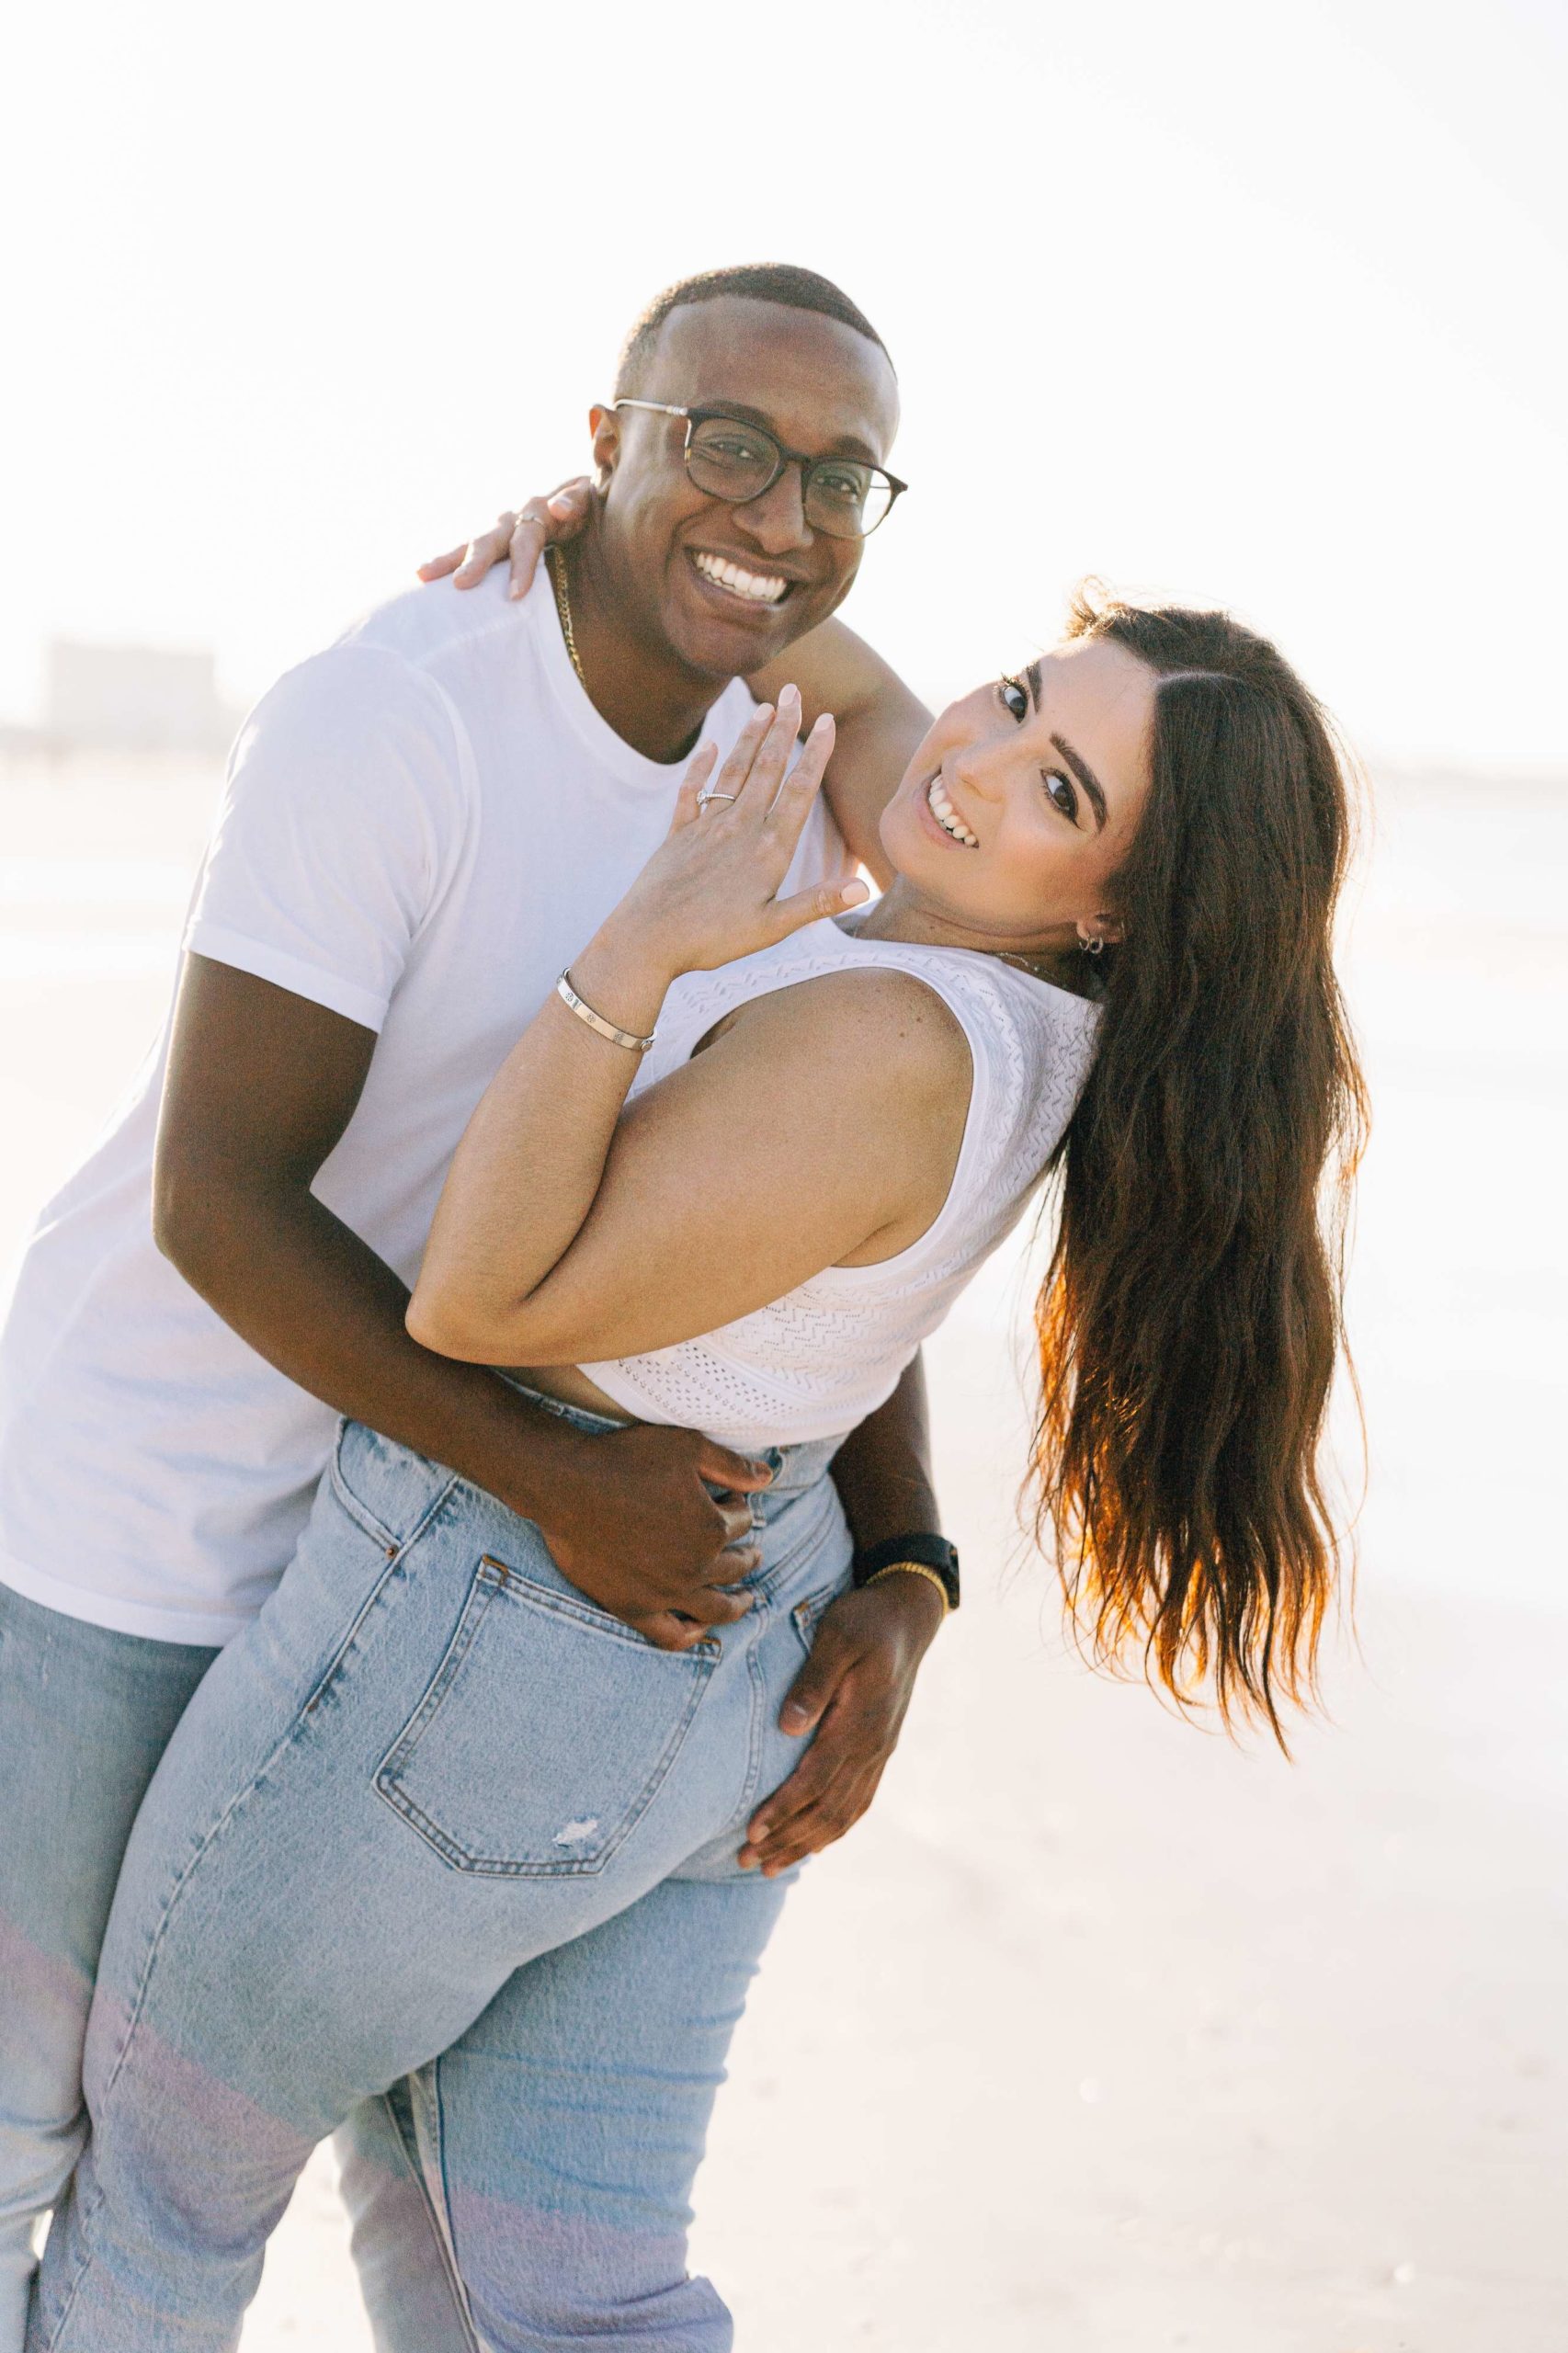 Aneila and Jerome are engaged! Jerome surprised Aneila with a beach proposal in Sarasota, FL because he knows how beaches hold a special place in Aneila’s heart!